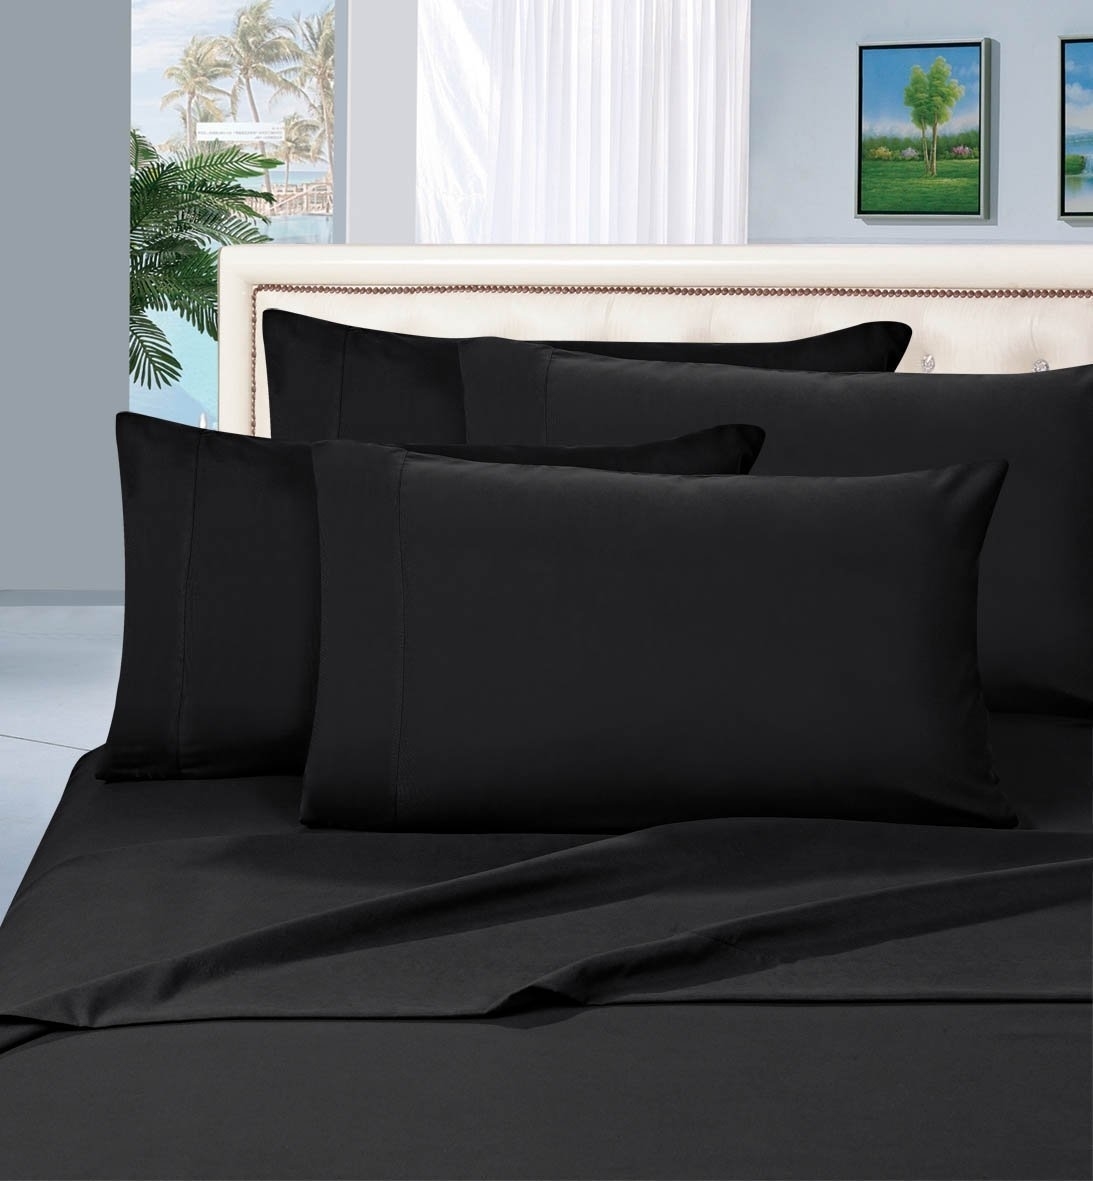 Elegant Comfort 1500 Series Wrinkle Resistant Egyptian Quality Hypoallergenic Ultra Soft Luxury 3-piece Bed Sheet Set, Twin, Black